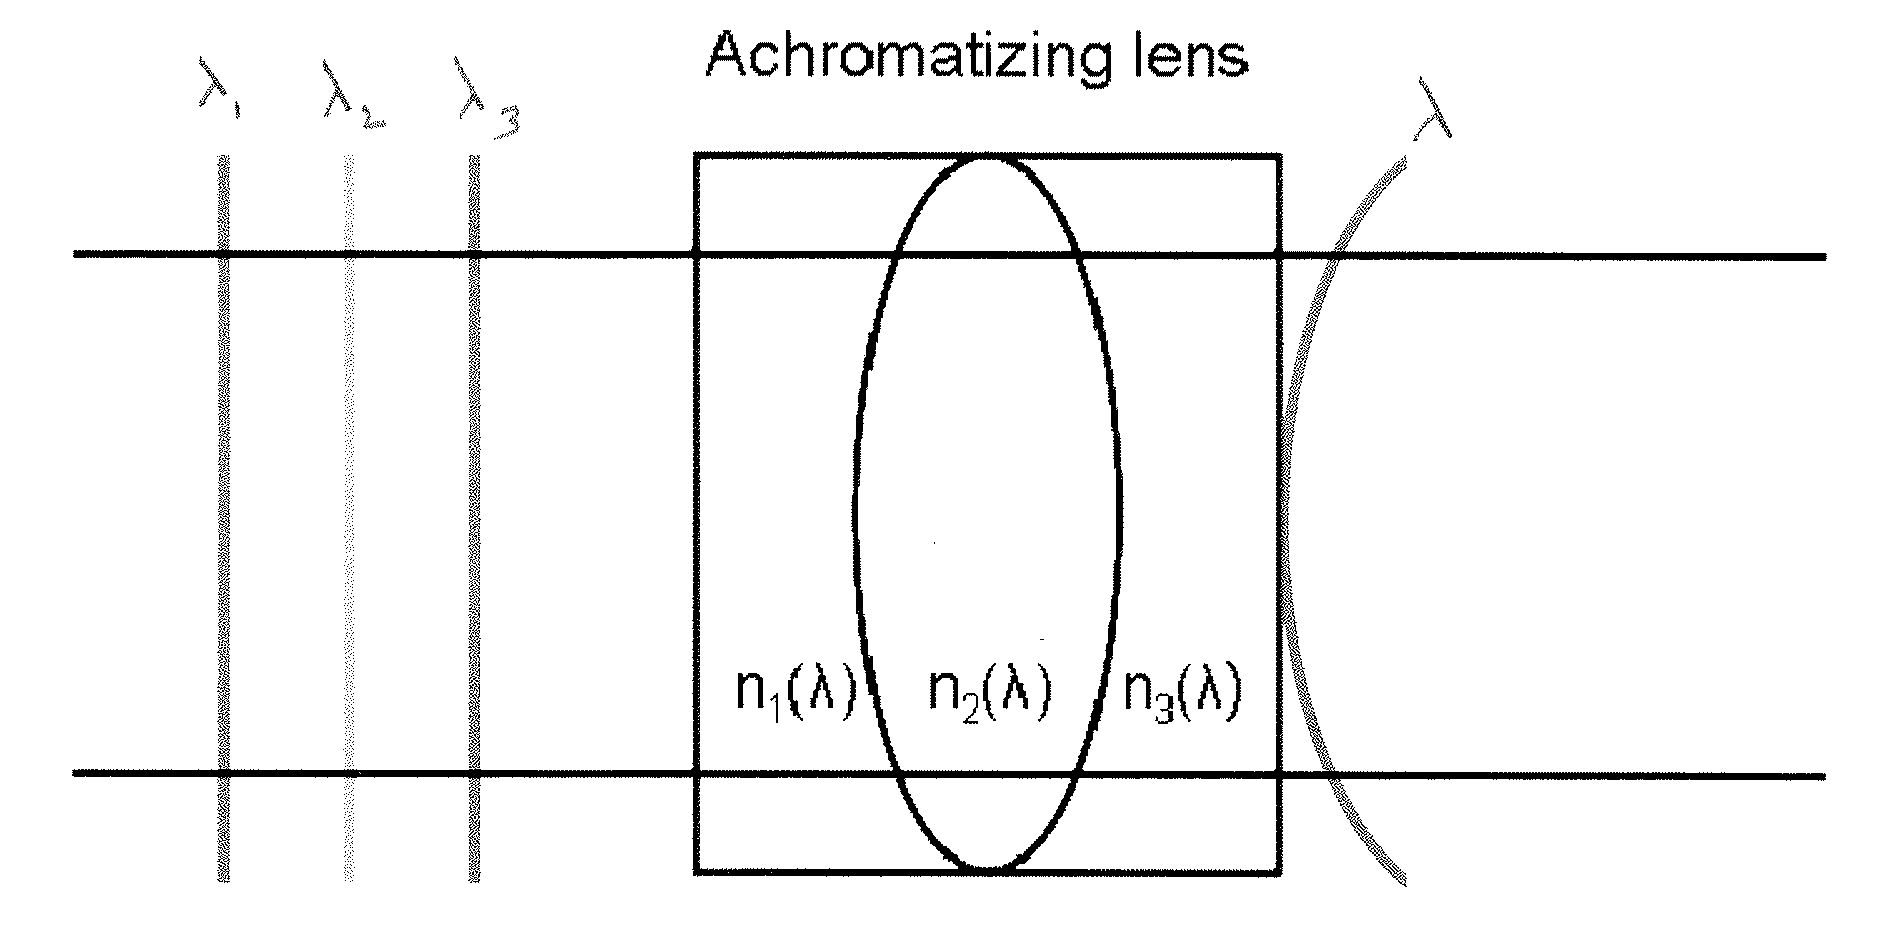 Tunable achromatizing optical apparatus, methods, and applications